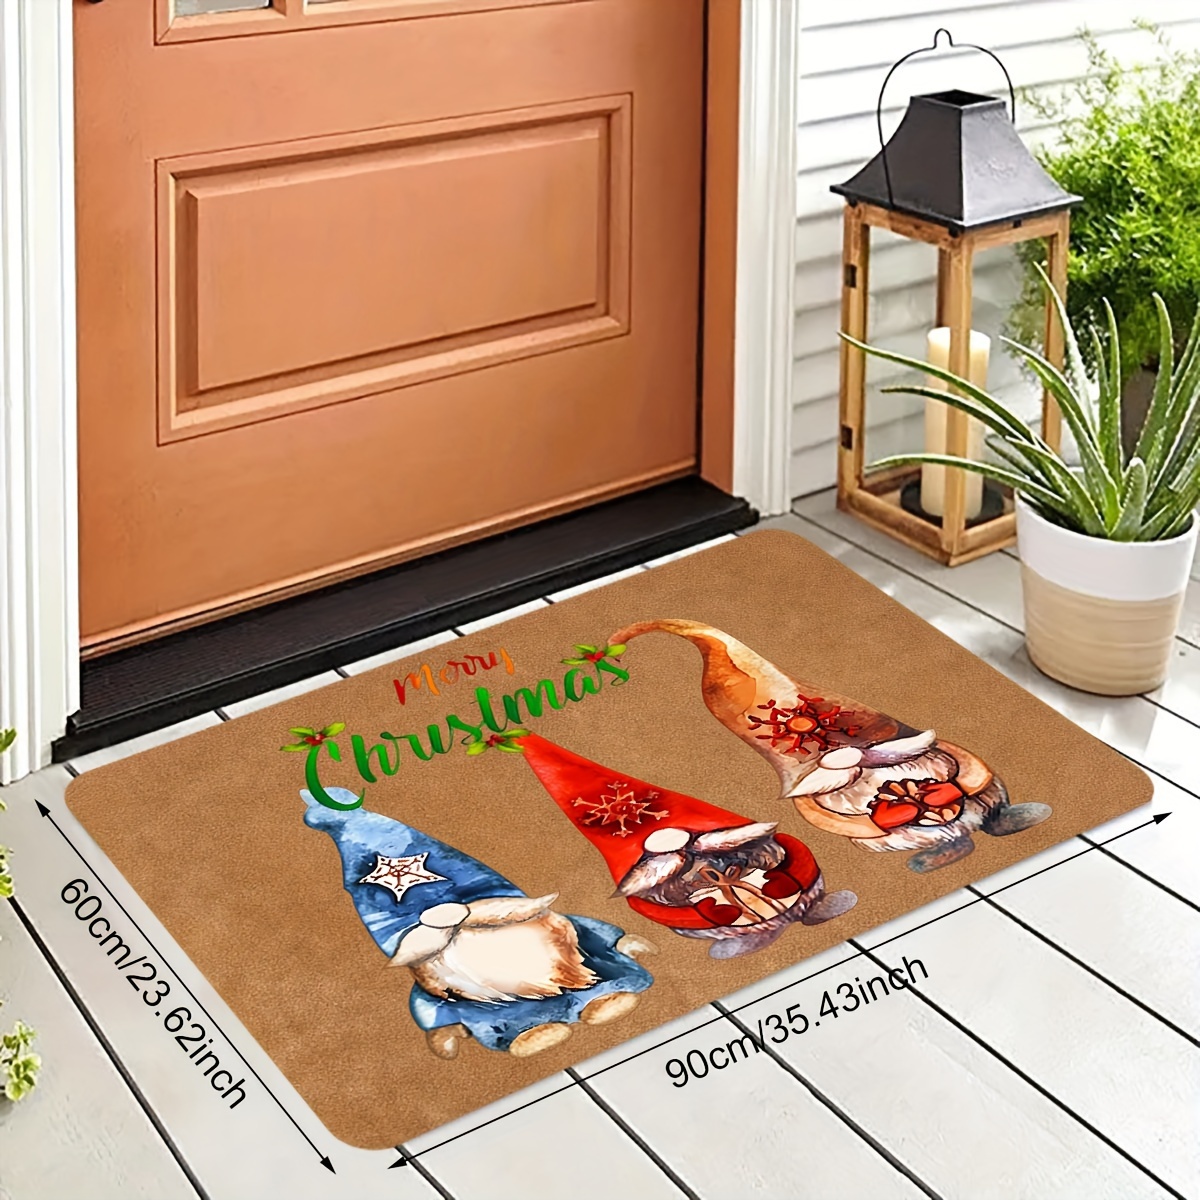 Merry Christmas Gnome Doormat Xmas Holiday Welcome Floor Mat Rugs